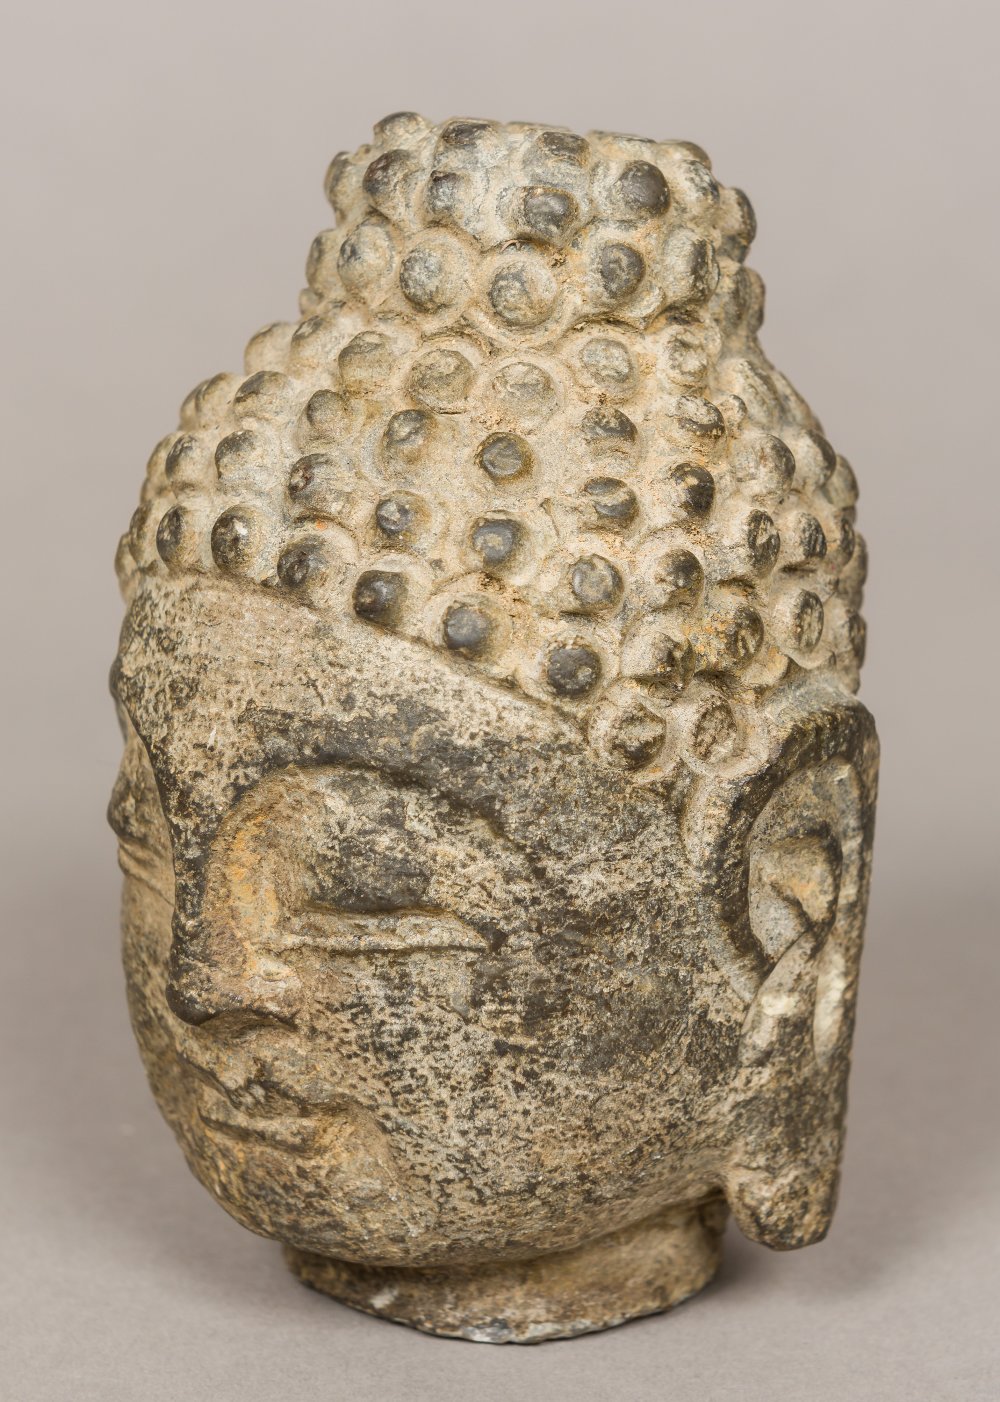 A South-East Asian carved stone Buddha's head Typically worked. 11 cm high.